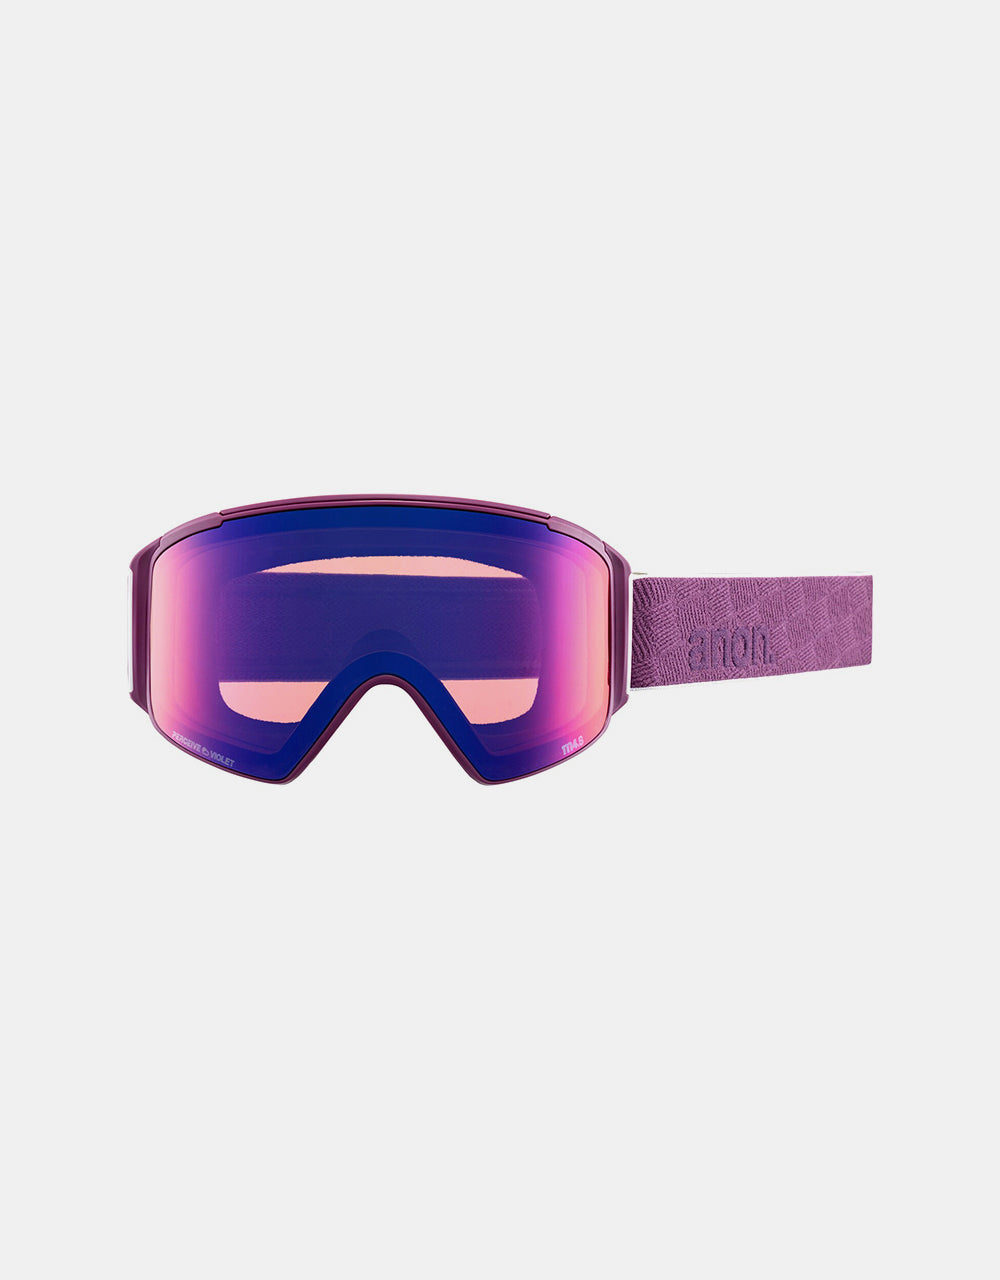 Anon M4S MFI® Face Mask Cylindrical Snowboard Goggles - Grape/Perceive Sunny Onyx